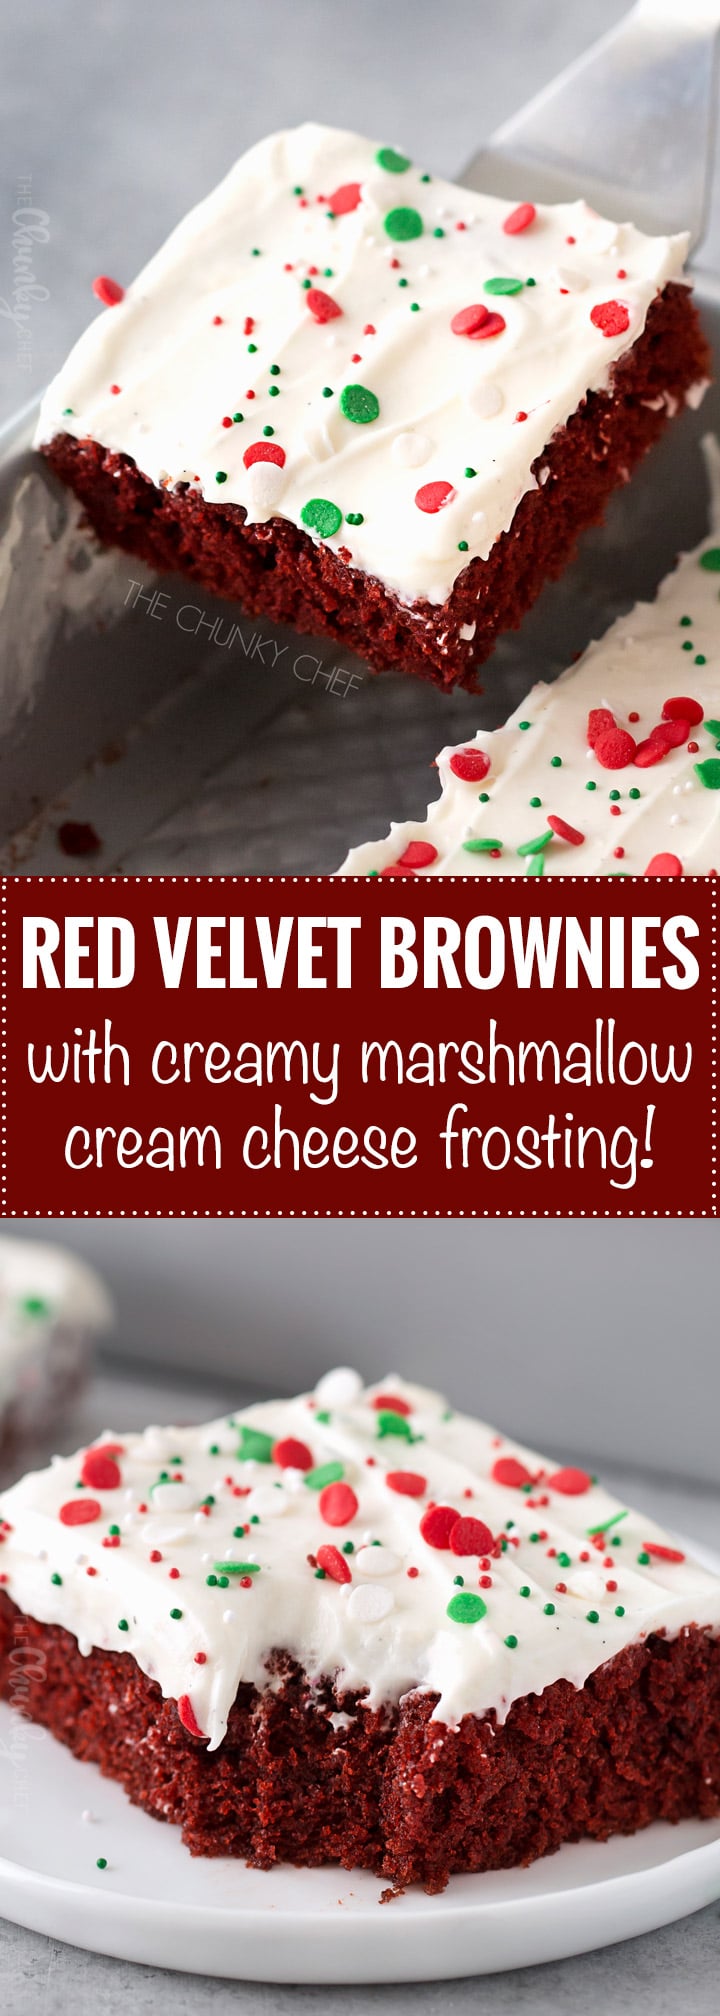 Red Velvet Brownies with Marshmallow Cream Cheese Frosting | Flavorful and festive red velvet brownies slathered in an ultra creamy frosting. Perfect for all holiday festivities, and easy to customize to other holidays as well! | #brownies #redvelvet #redvelvetrecipe #holidaybaking #brownierecipes #christmasdesserts